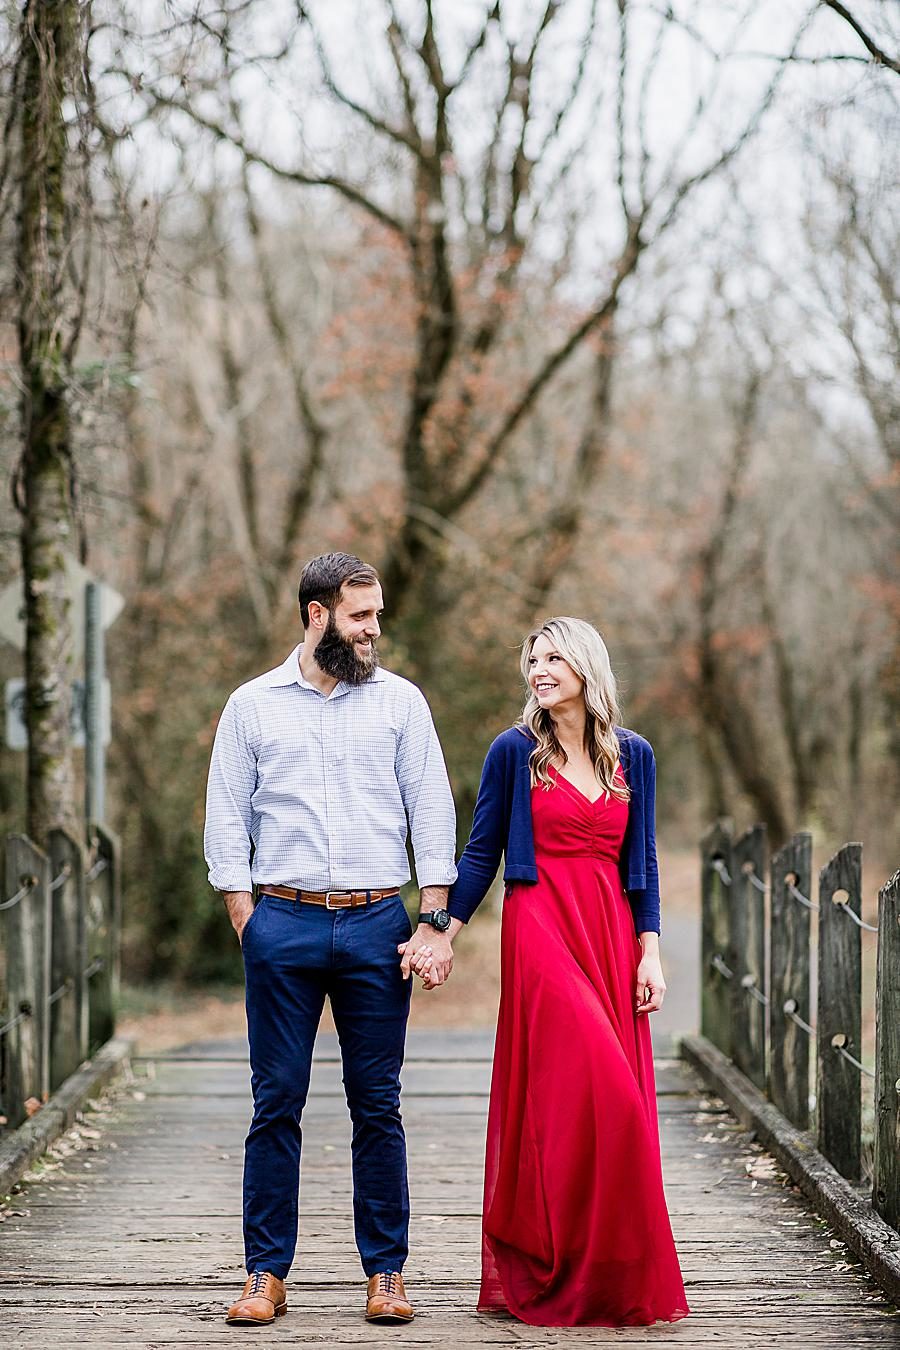 Engagement outfits by Knoxville Wedding Photographer, Amanda May Photos.